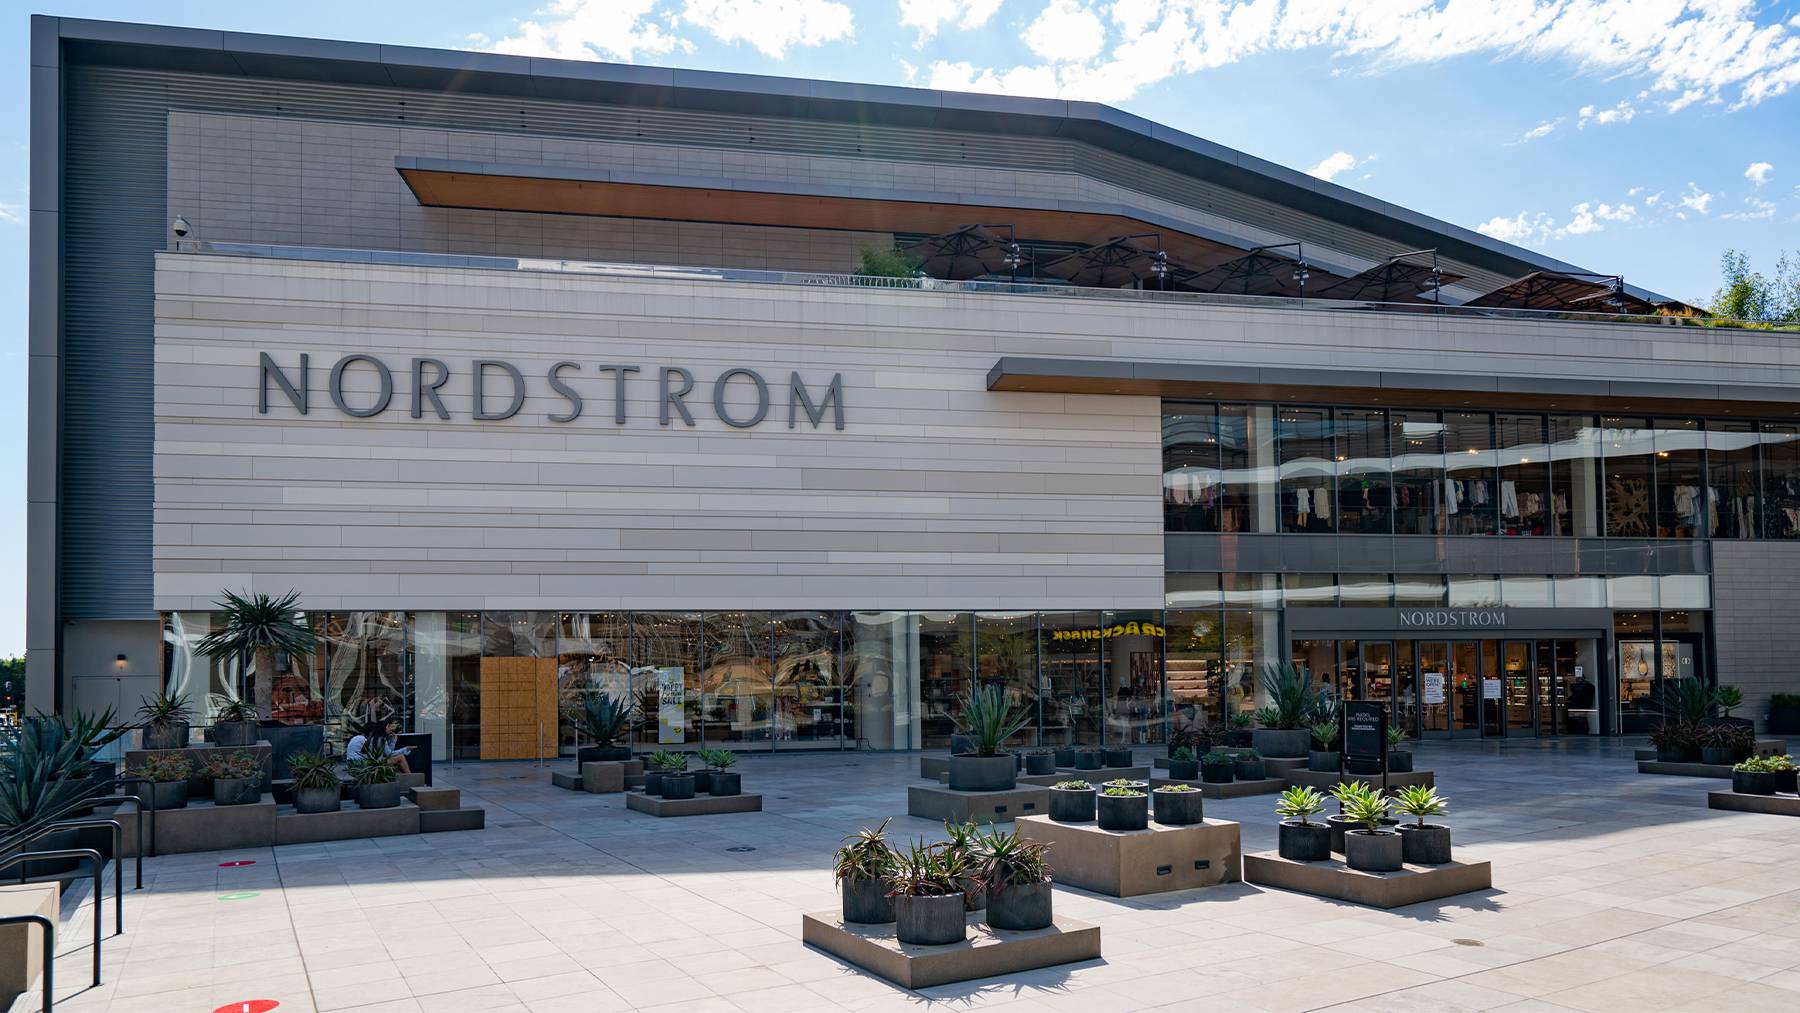 A general view of the Nordstrom department store at the Westfield Century City shopping mall in California.